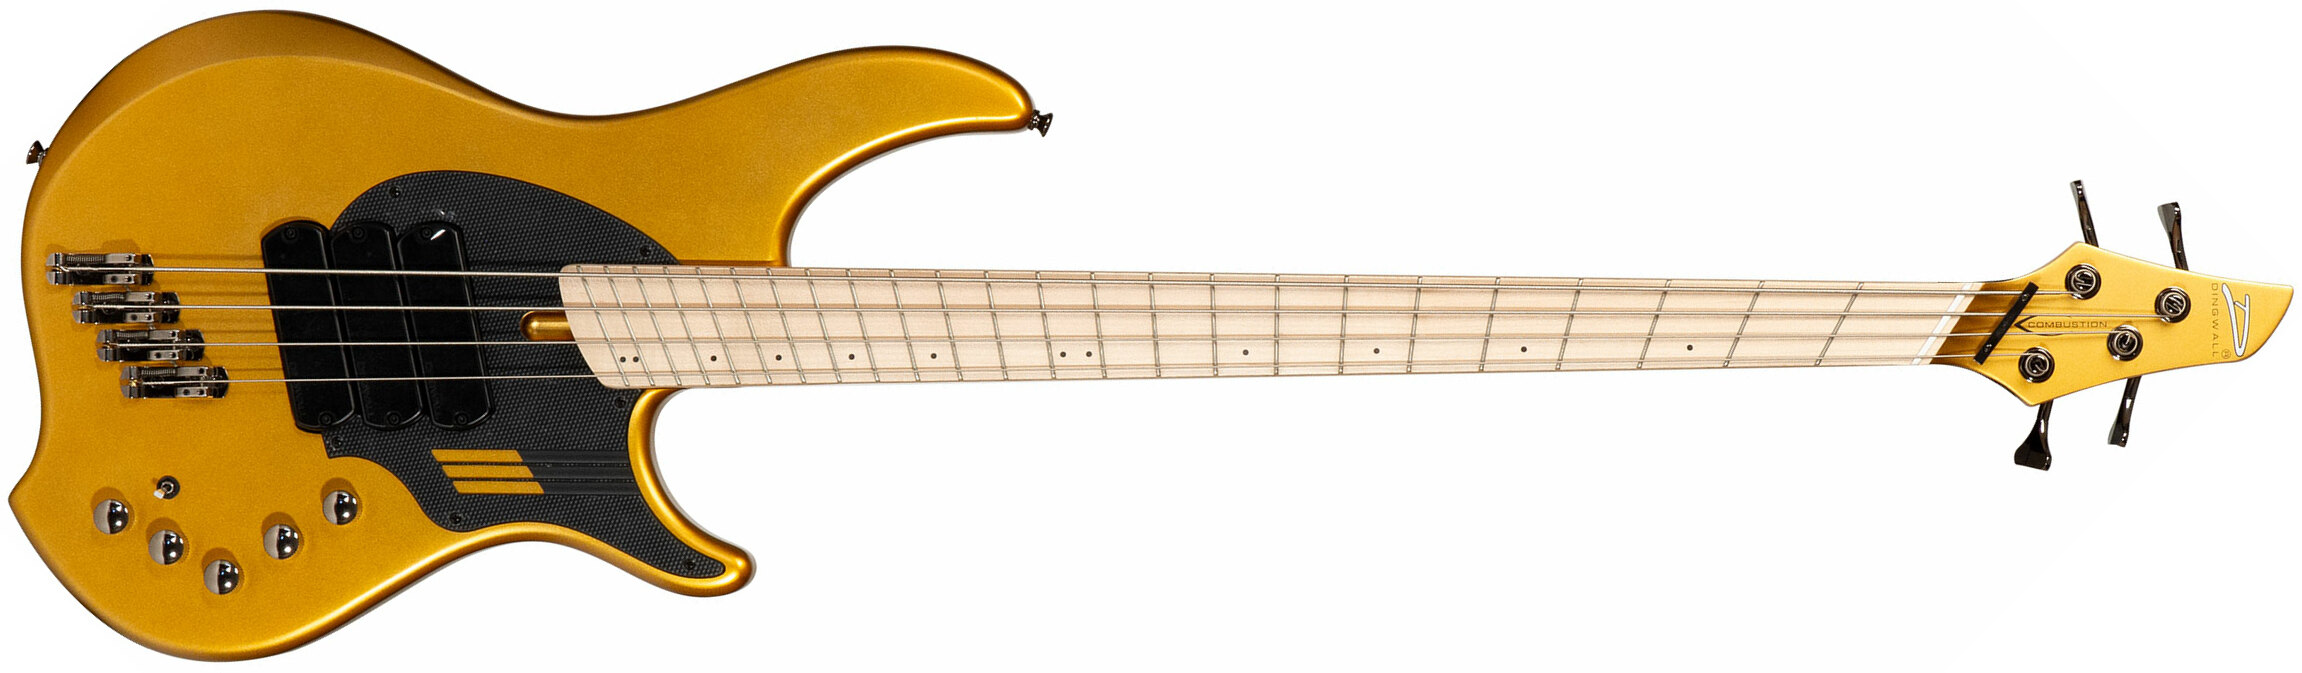 Dingwall Adam Nolly Getgood Ng3 4c Signature 3pu Active Mn - Gold Matte - Basse Électrique Solid Body - Main picture